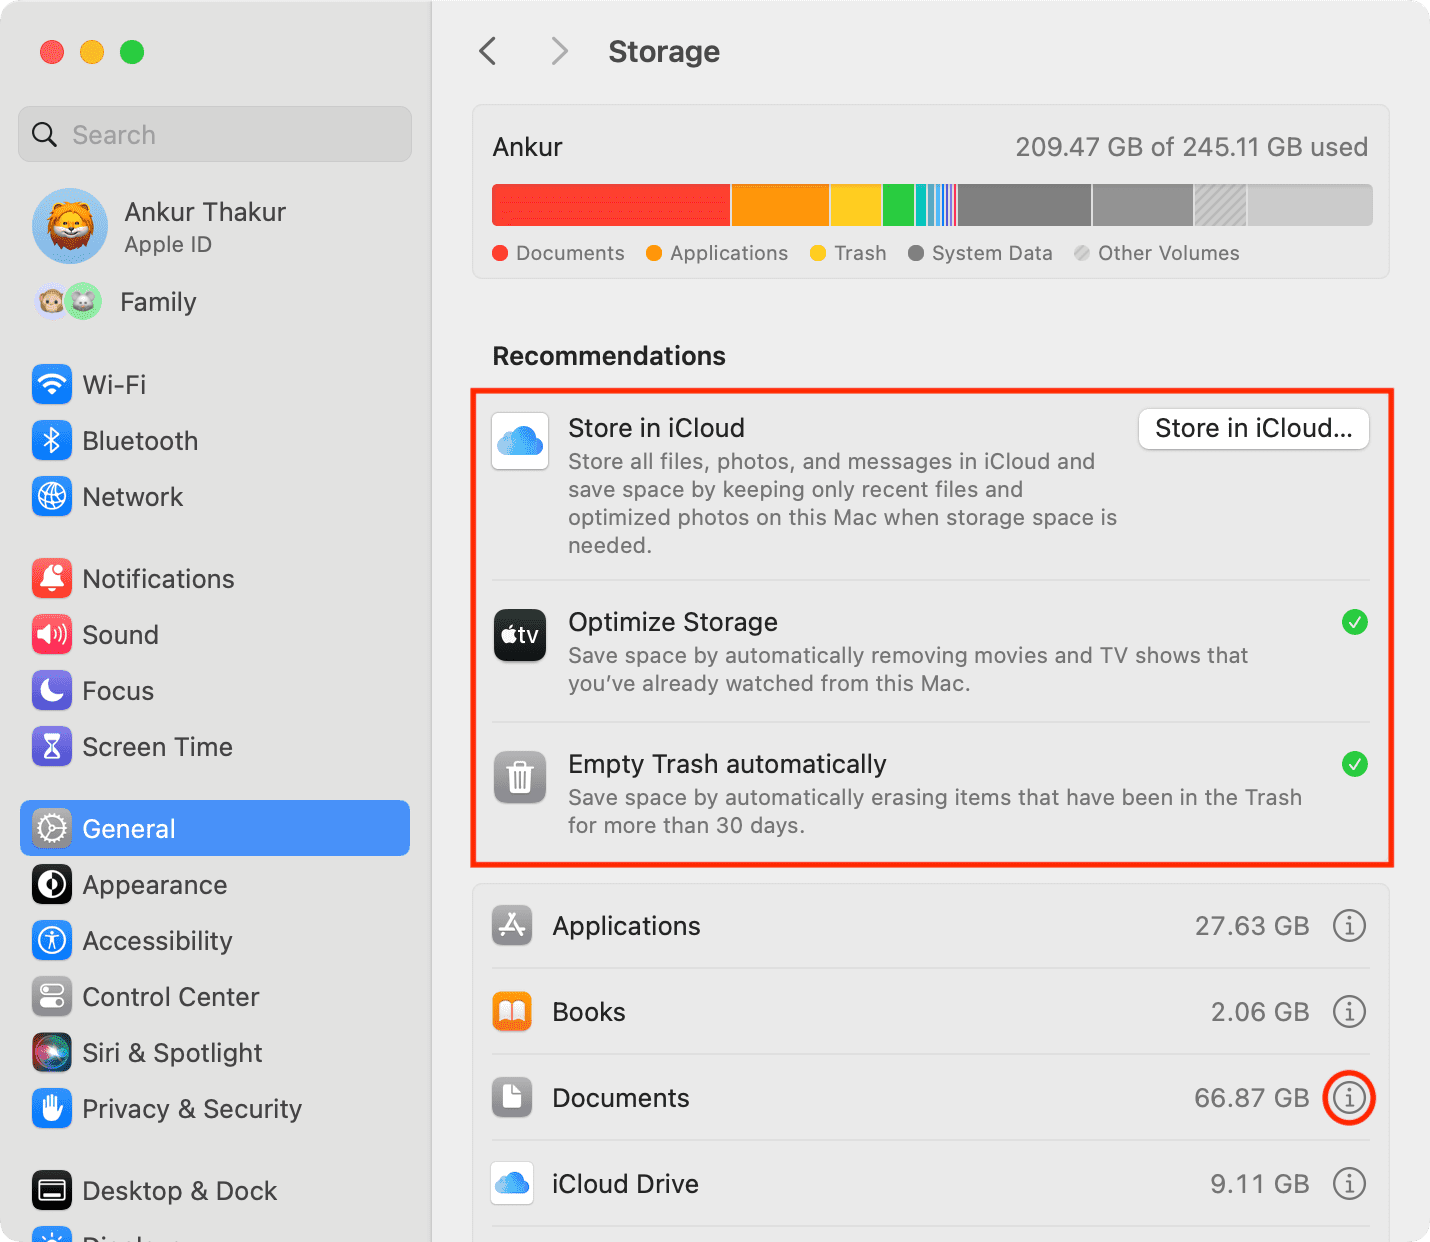 Storage recommendations turned on in Mac settings